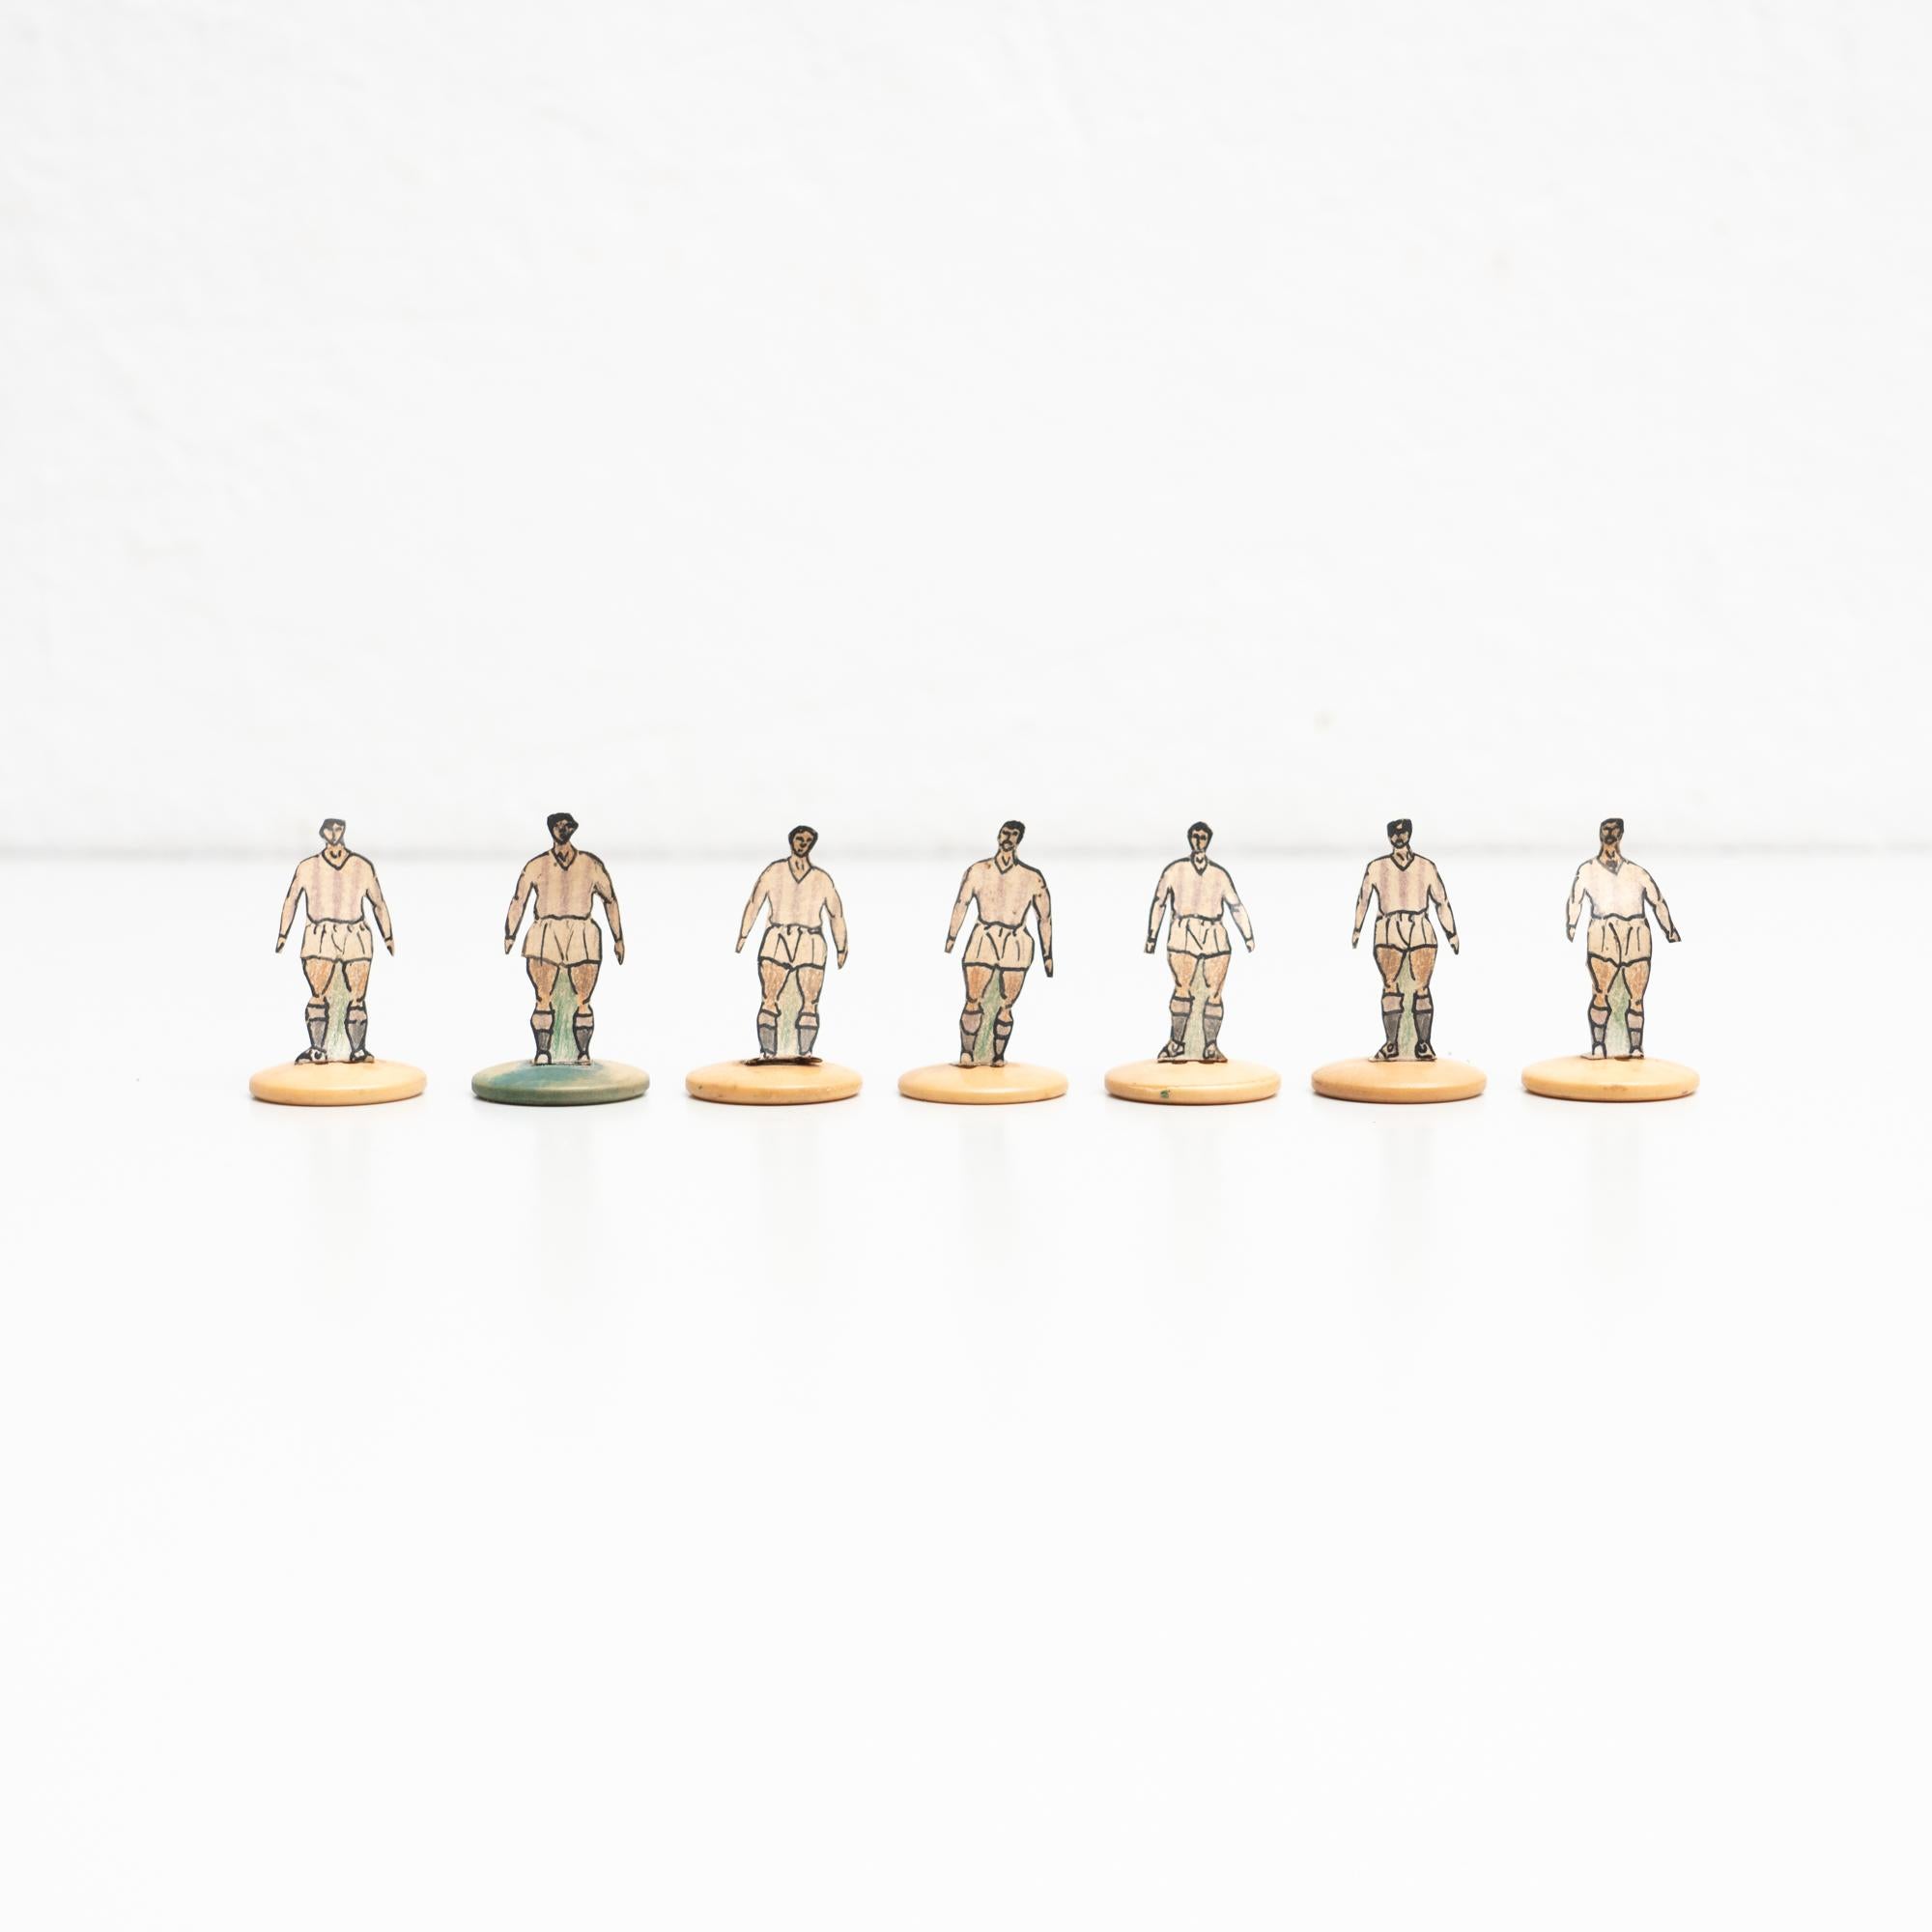 Set of seven table button soccer game players. Traditional figures used to play this classic button Spanish game. 

The players are build buy attaching a printed photography or drawing of an actual football soccer player to a clothing button.